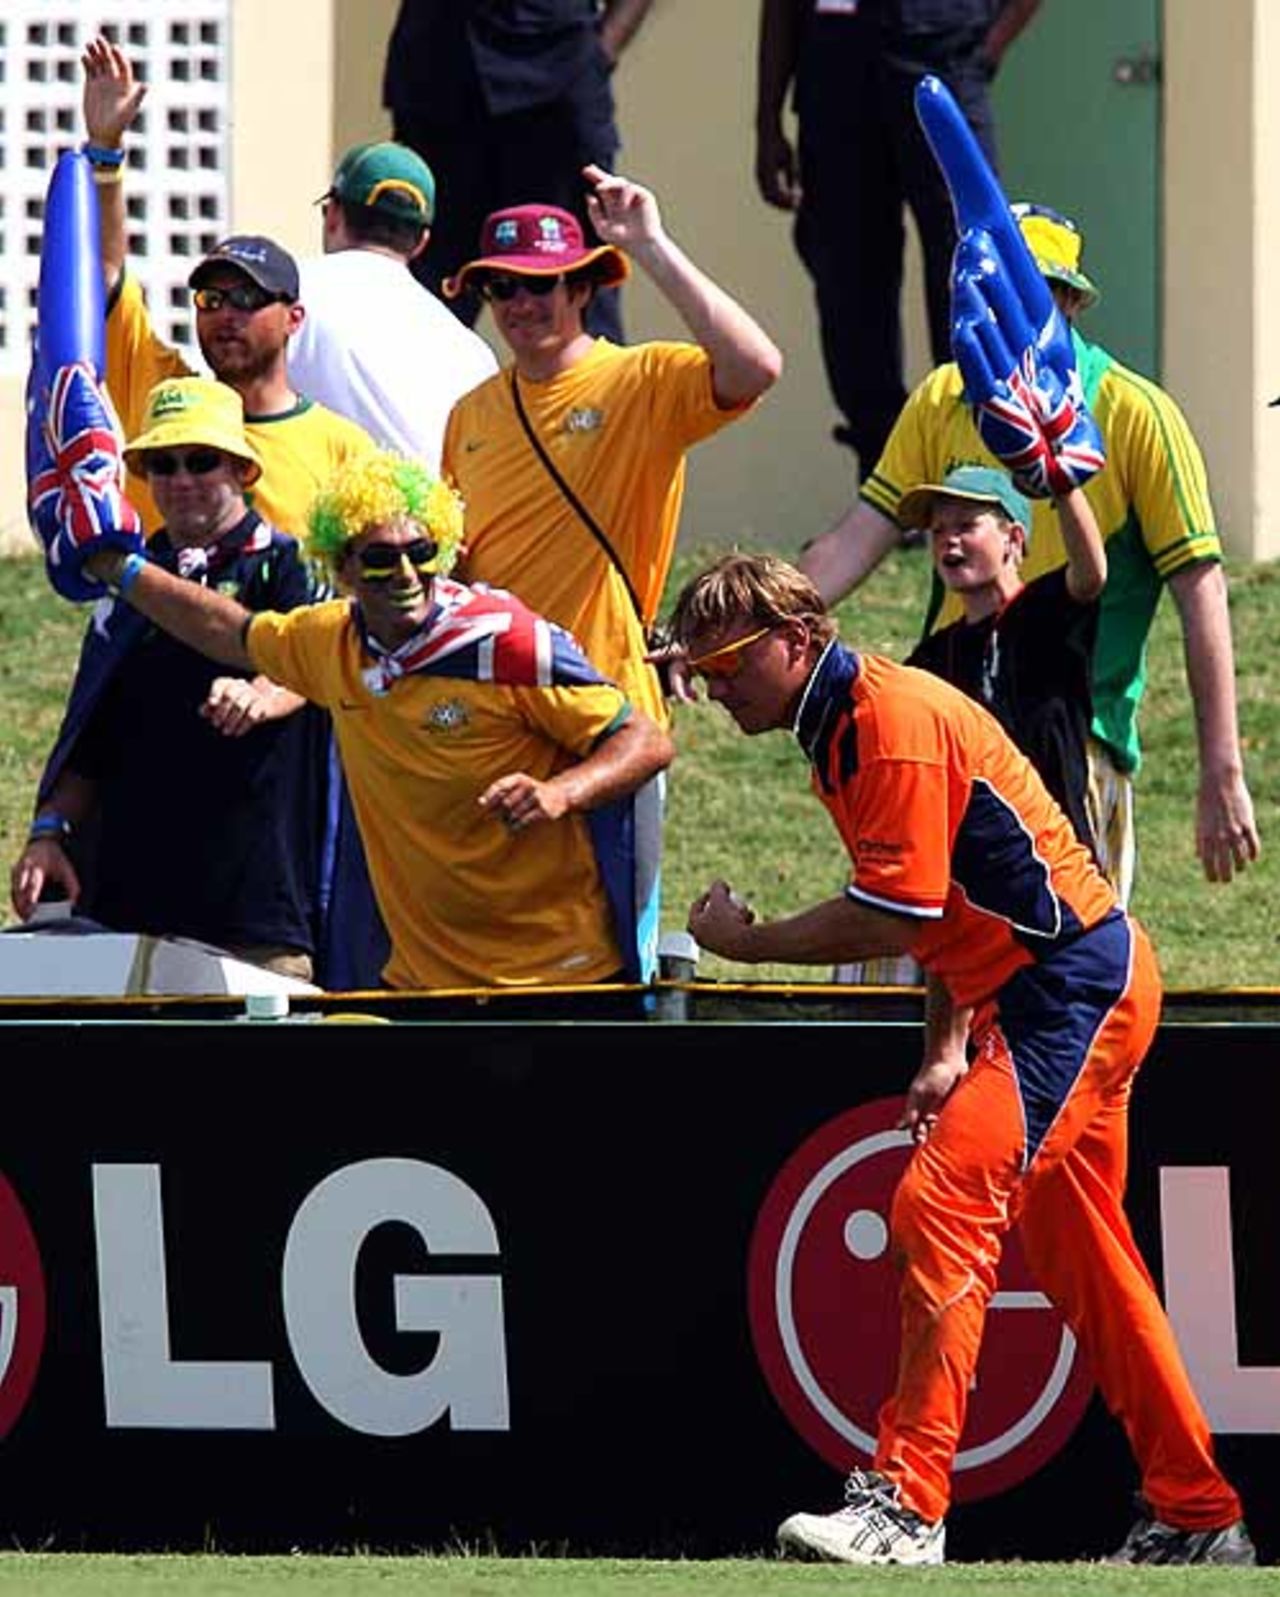 Australian cricket fans show their delight at Tim de Leede's failure to stop the ball at the boundary, Australia v Netherlands, Group A, St Kitts, March 18, 2007